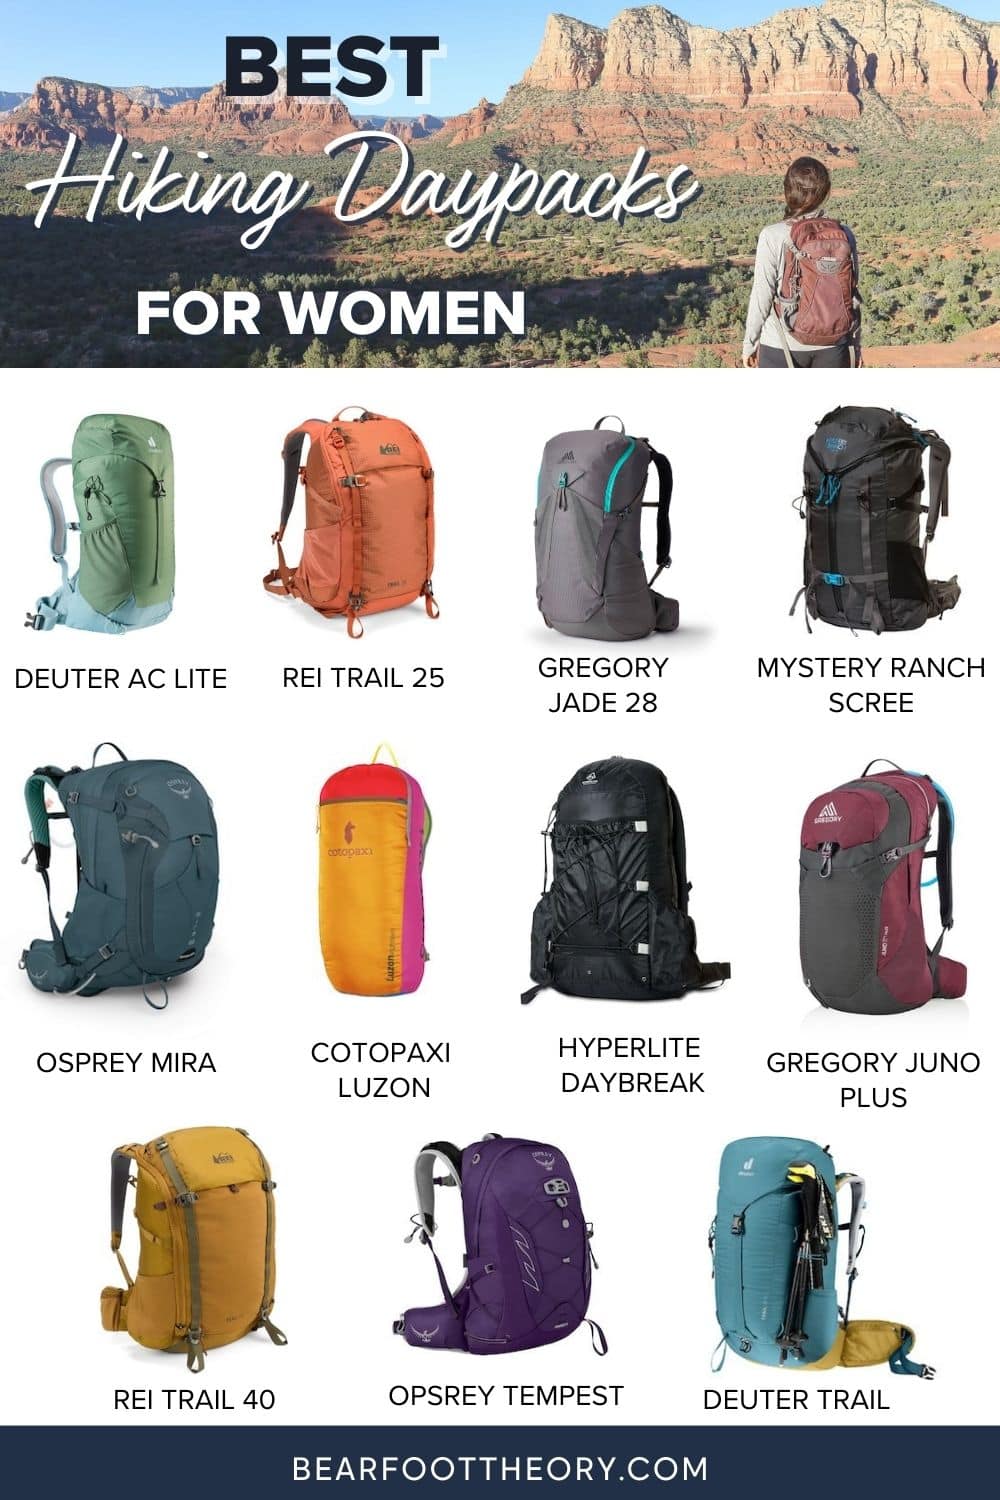 Discover the ultimate women's hiking day packs for your next adventure! Our top picks combine comfort, durability and style to keep you moving in the great outdoors. From spacious compartments to convenient hydration systems, these backpacks have it all. Read on and get ready to hit the trails with confidence!